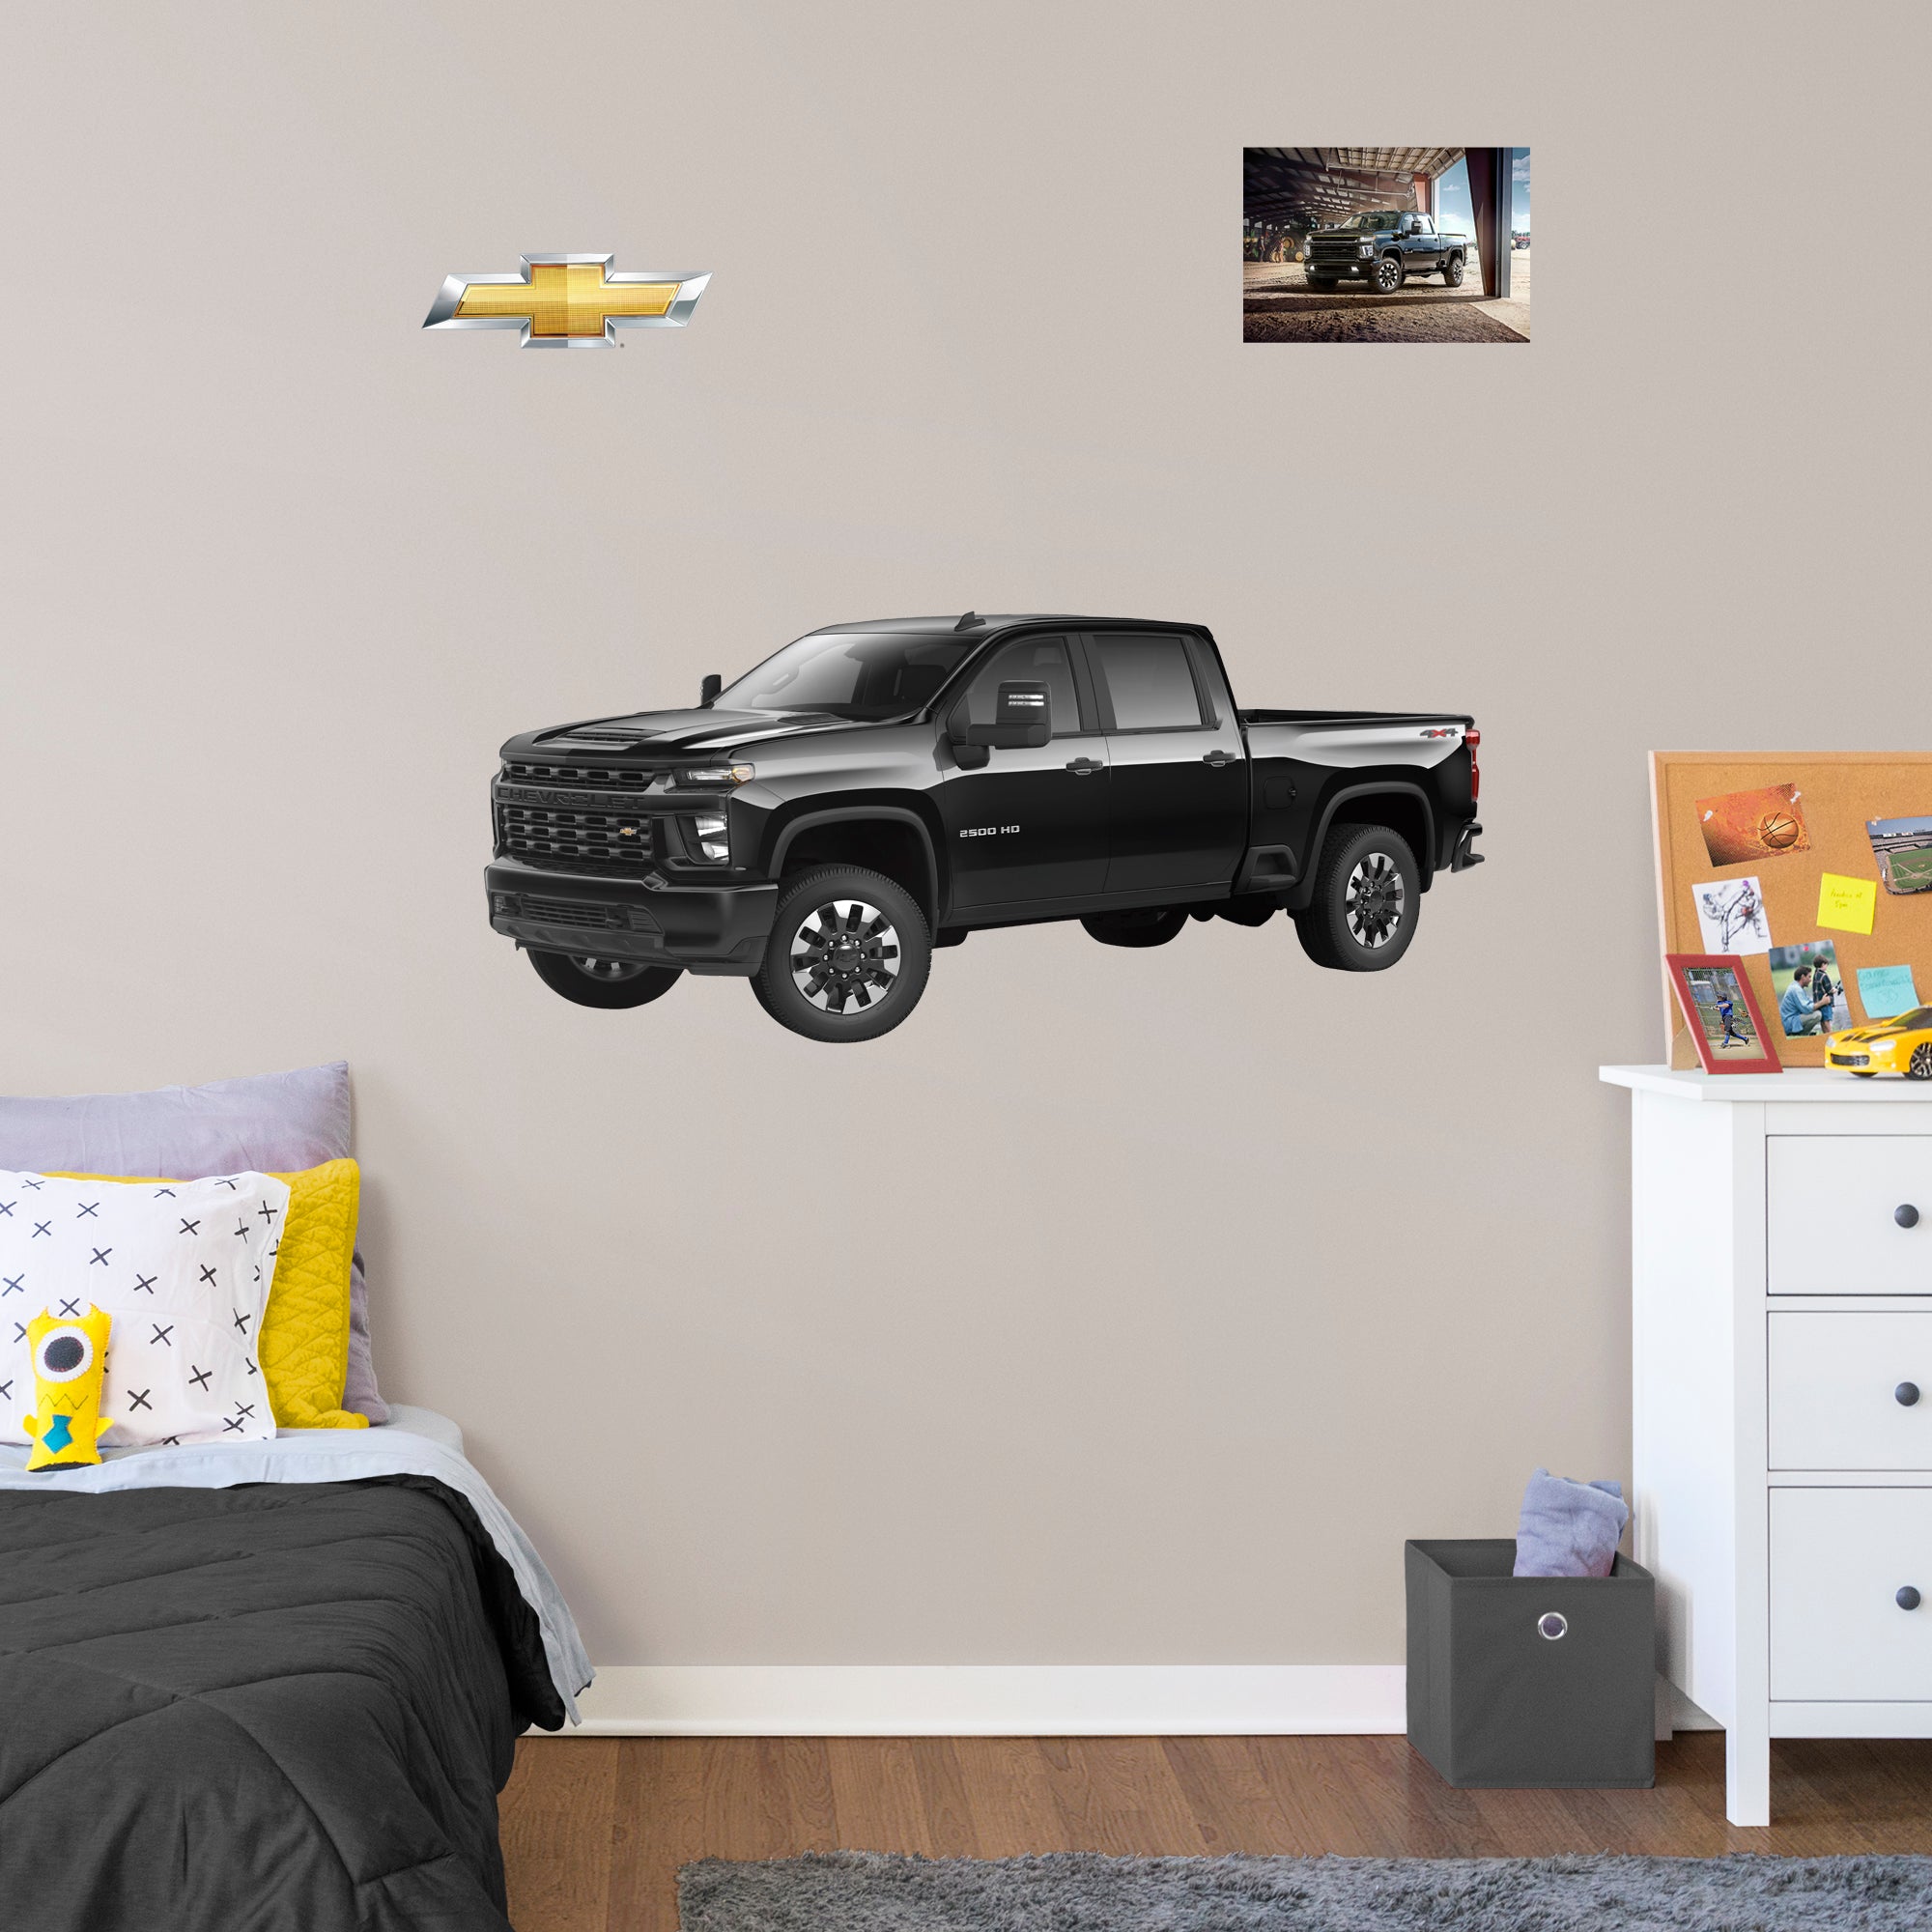 Chevrolet Black Silverado: Officially Licensed GM Removable Wall Decal Life-Size + 2 Decals by Fathead | Vinyl